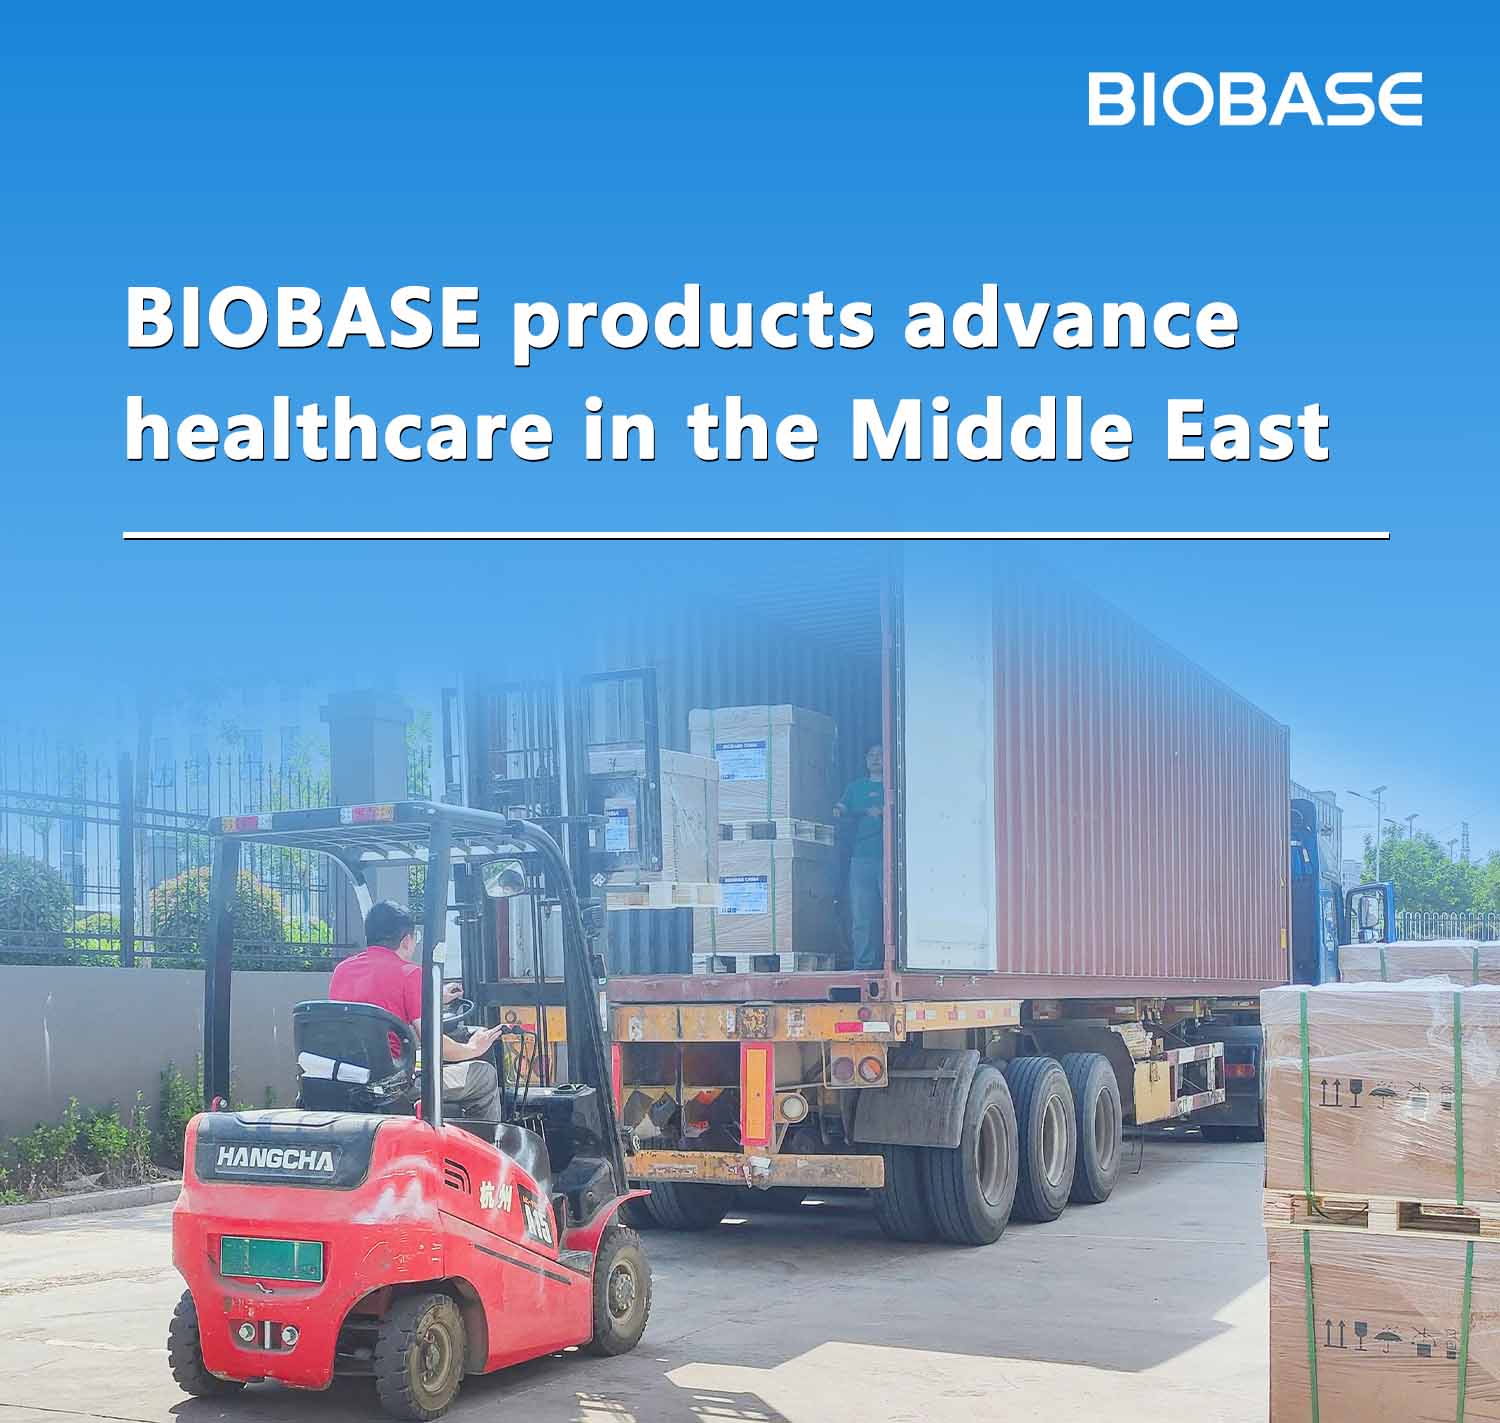 BIOBASE products advance healthcare in the Middle East